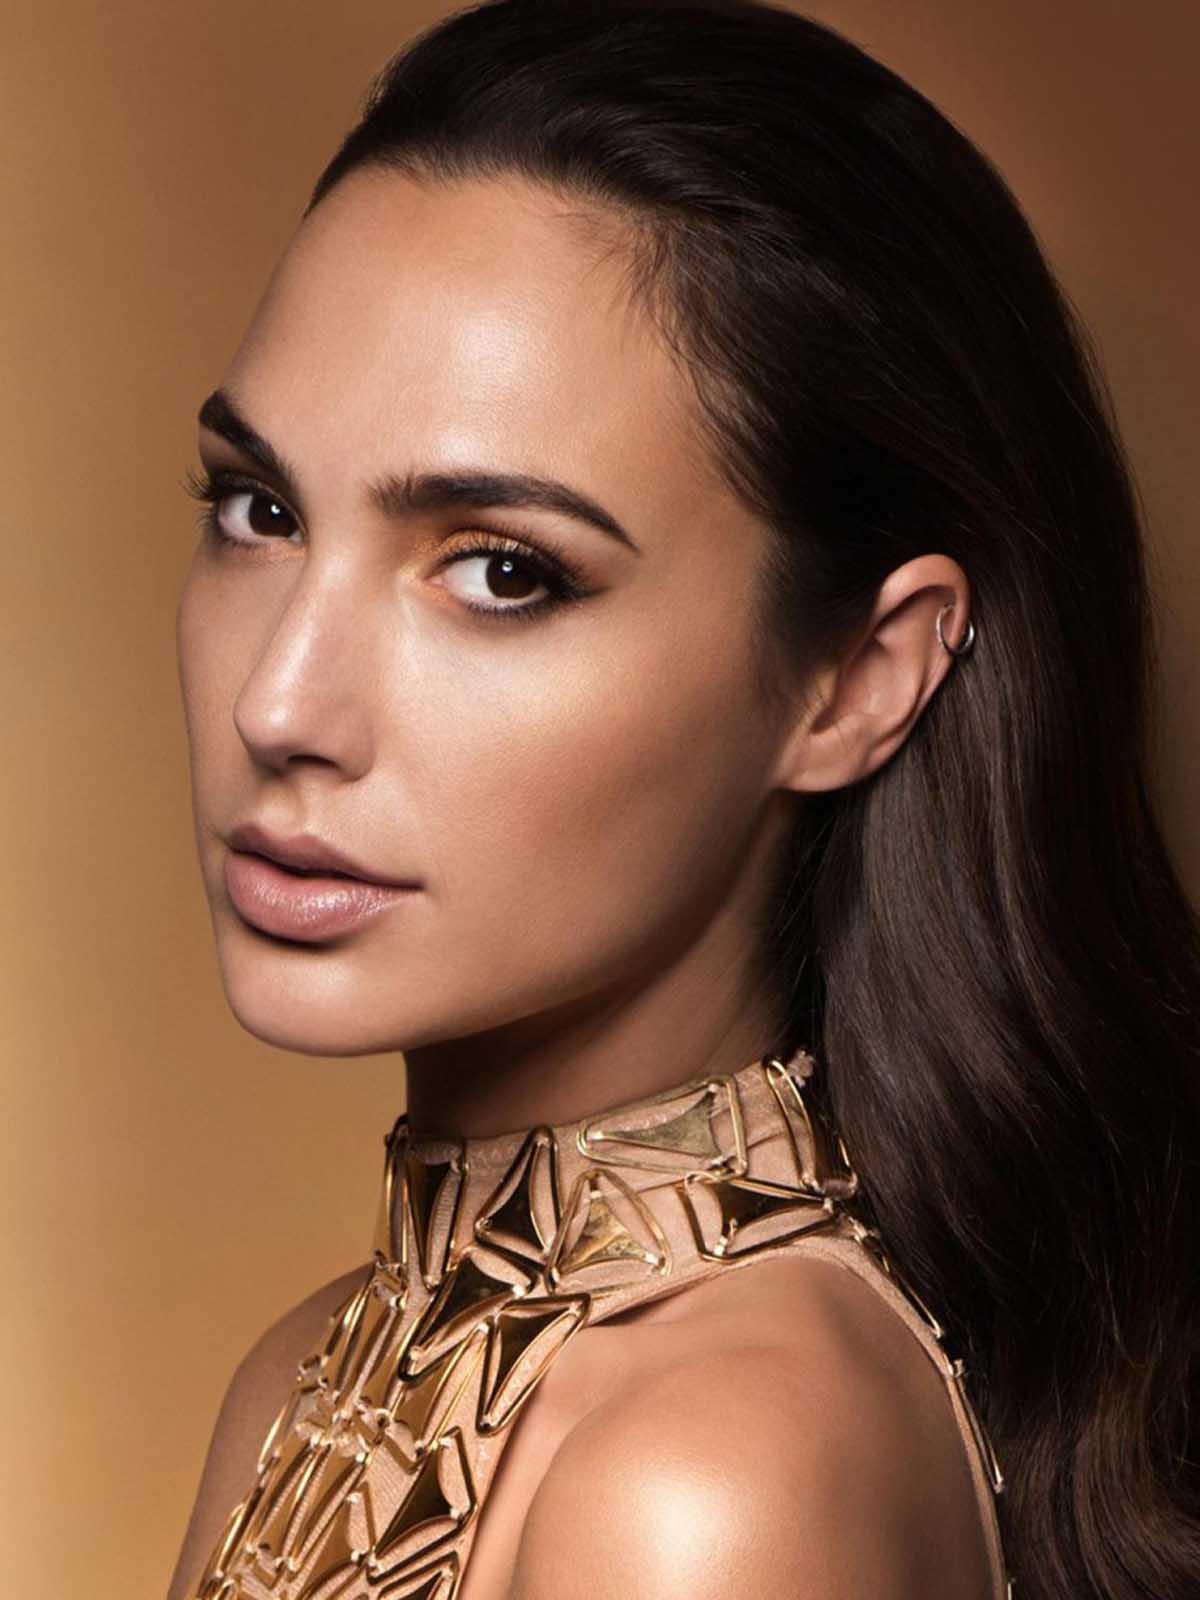 Gal Gadot Hd - She won the miss israel title in 2004 and went on to